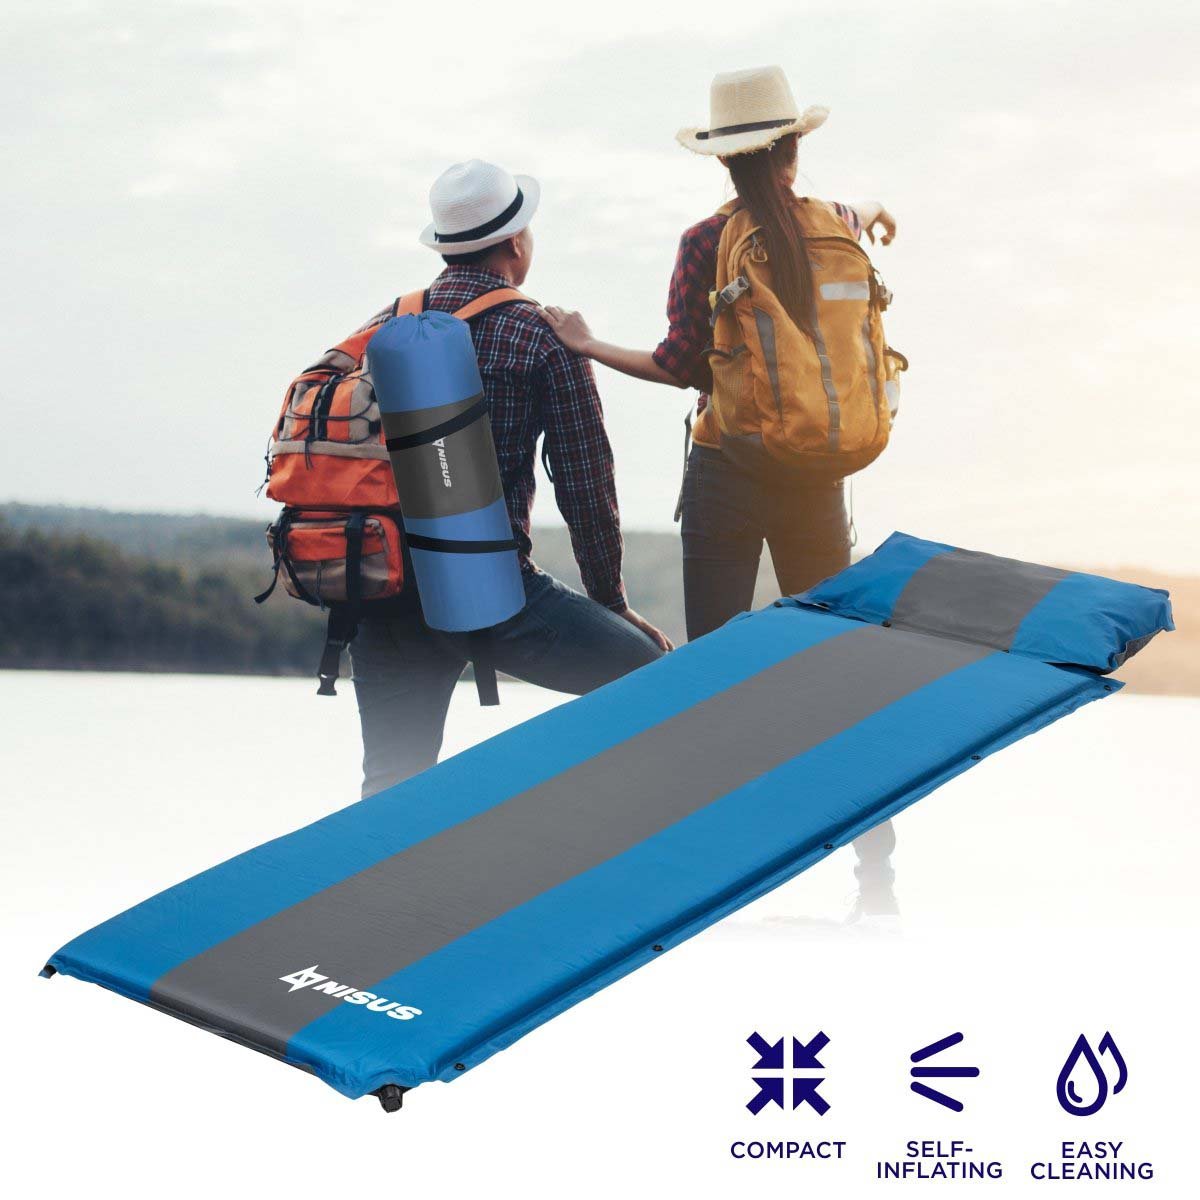 2-inch Lightweight Self Inflating Camping Sleeping Pad could be taken to any outdoor adventure